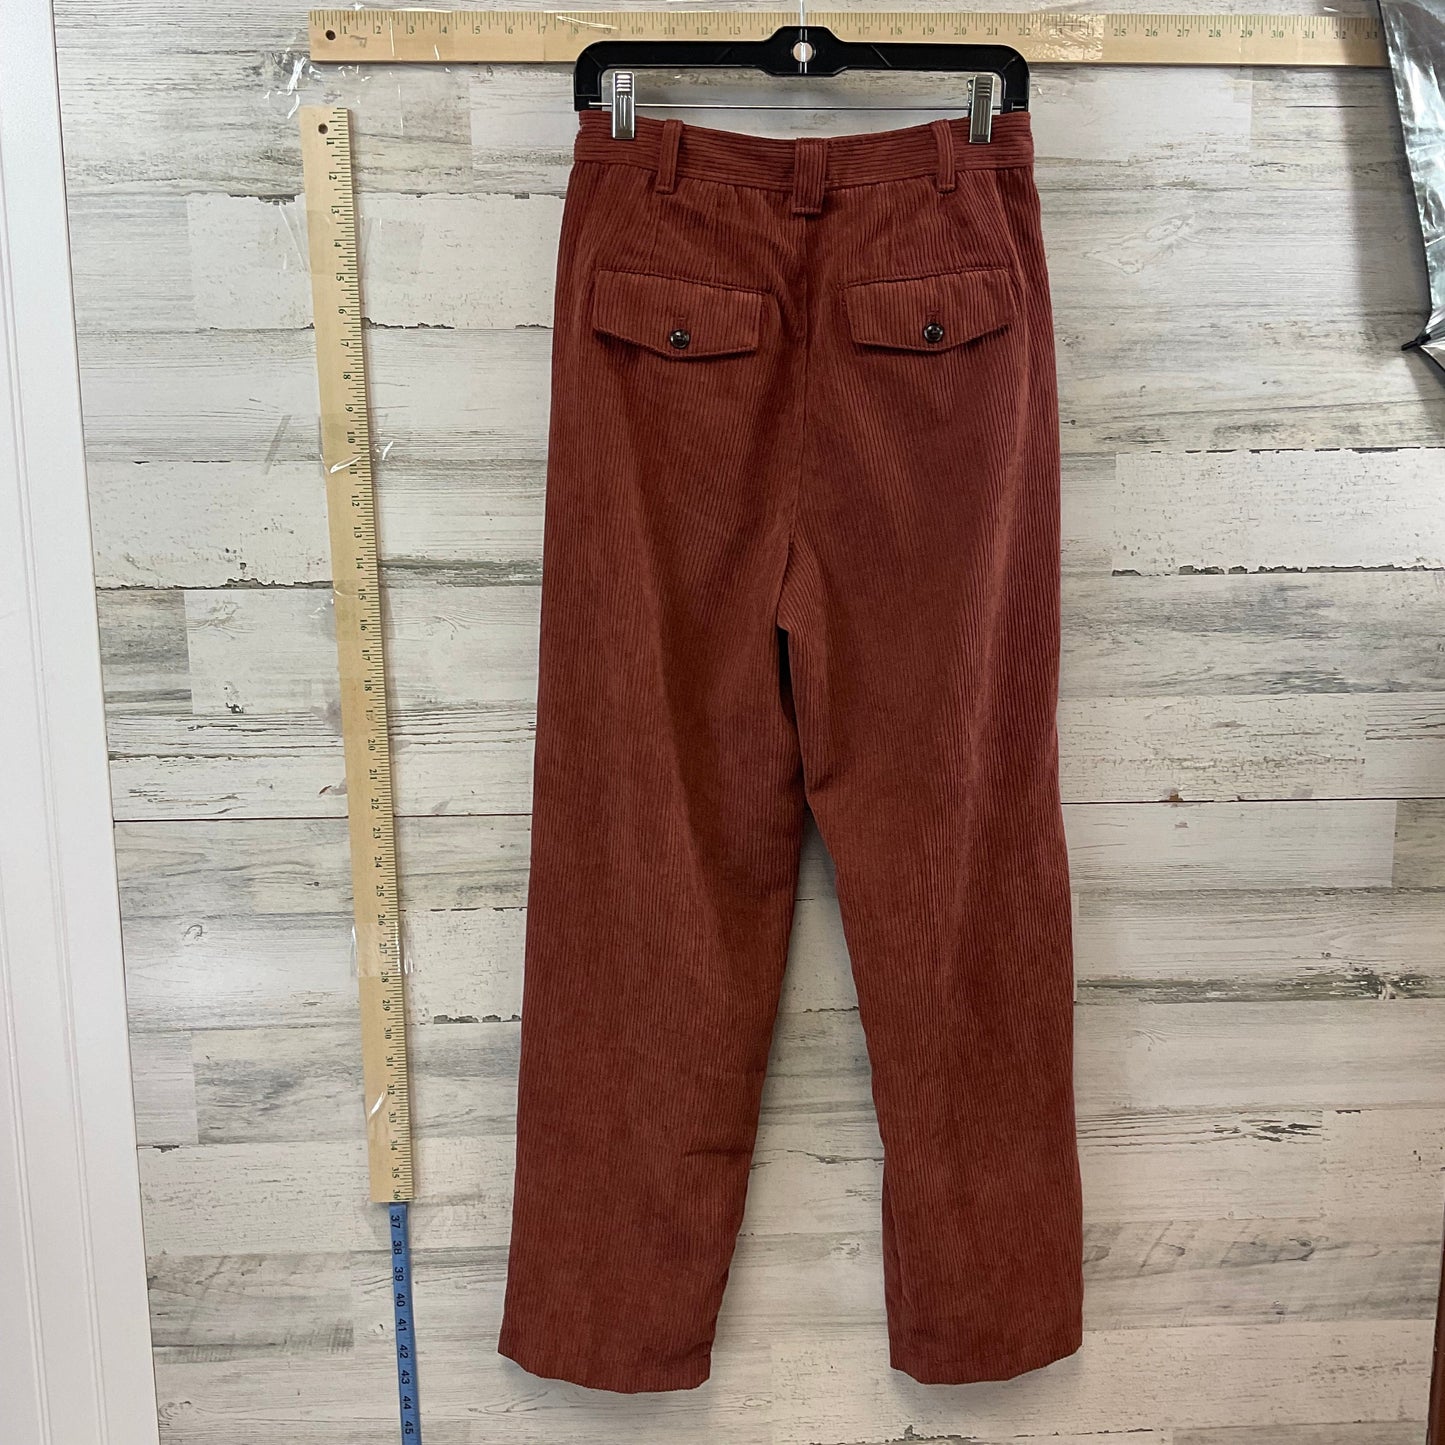 Pants Corduroy By Madewell  Size: 4